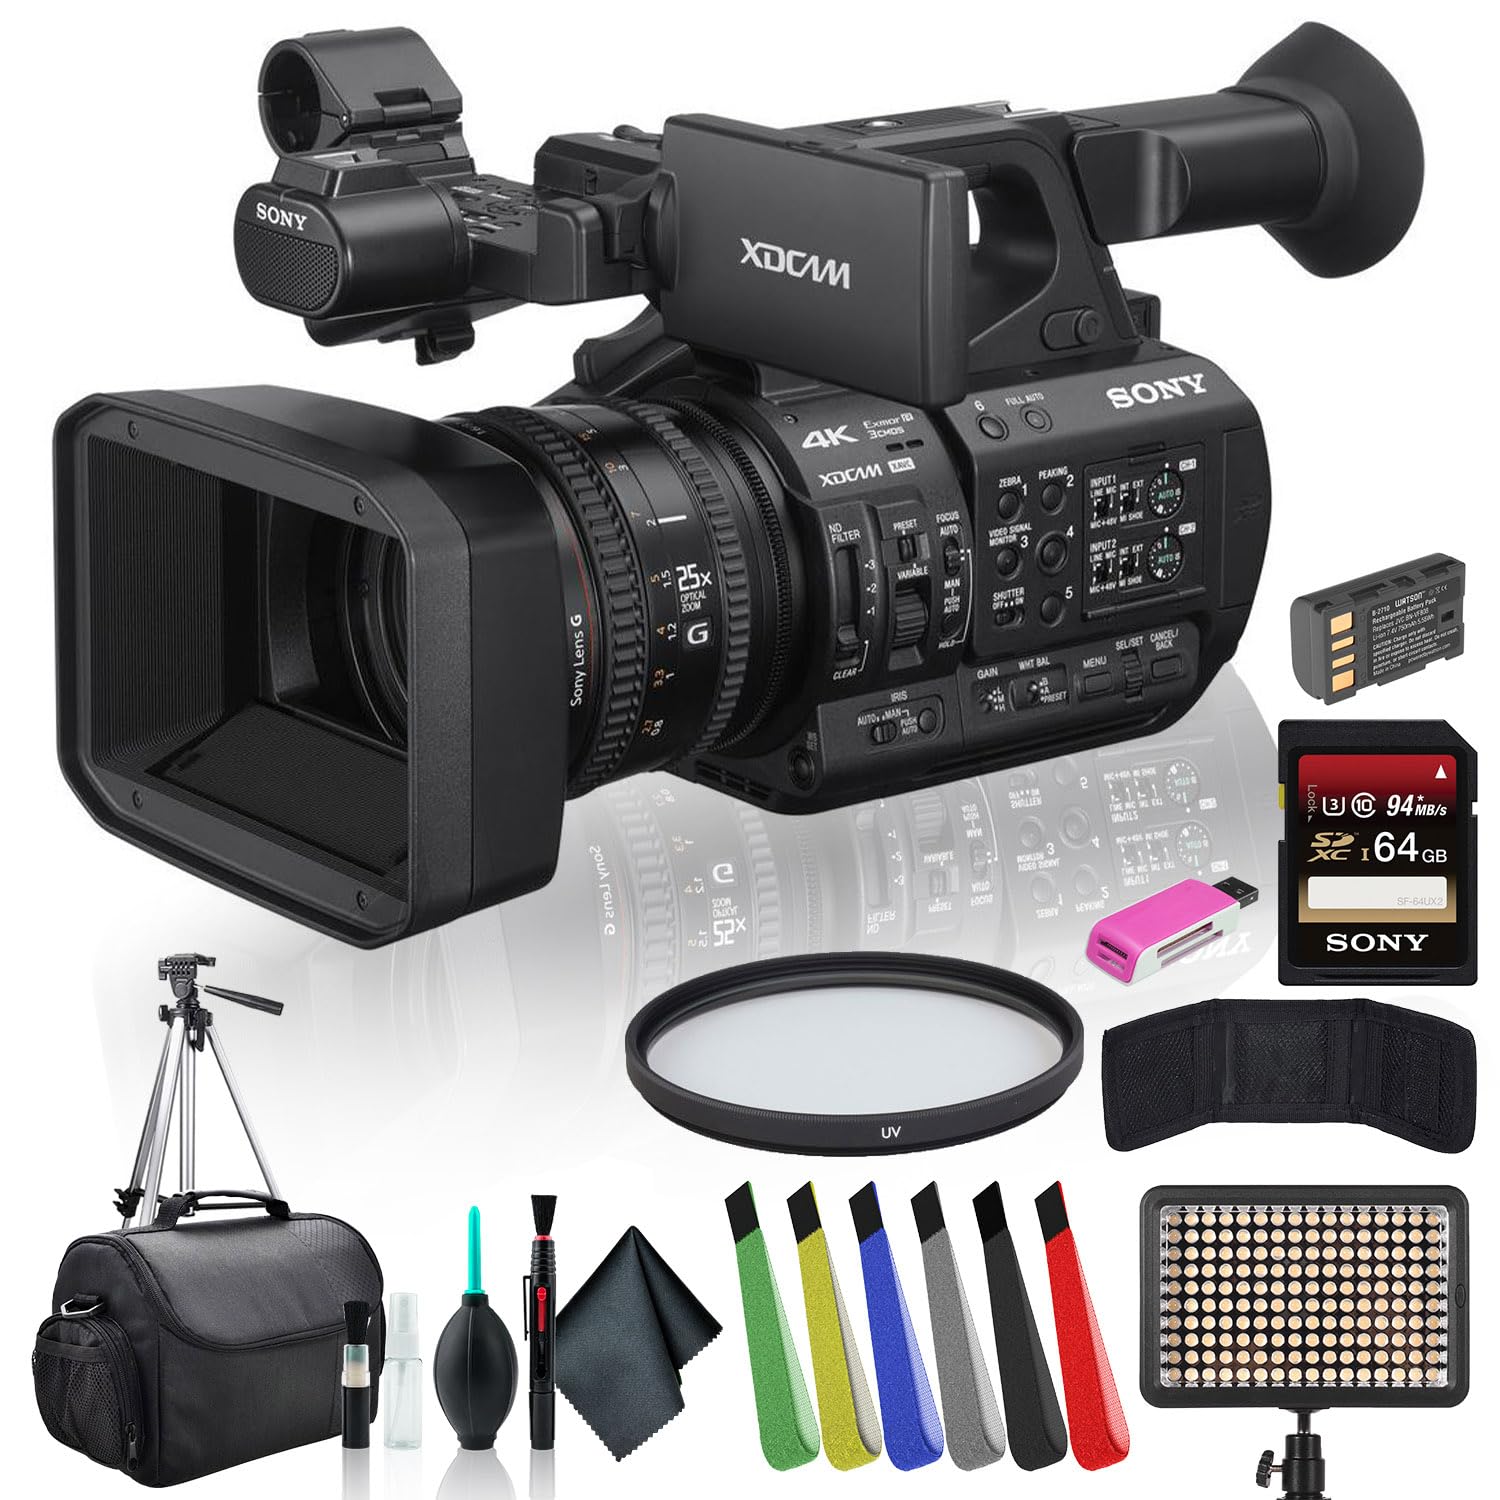 Sony PXW-Z190V 4K XDCAM Camcorder PXW-Z190V with Tripod, Padded Case, LED Light, 64GB Memory Card and and More Starter Bundle